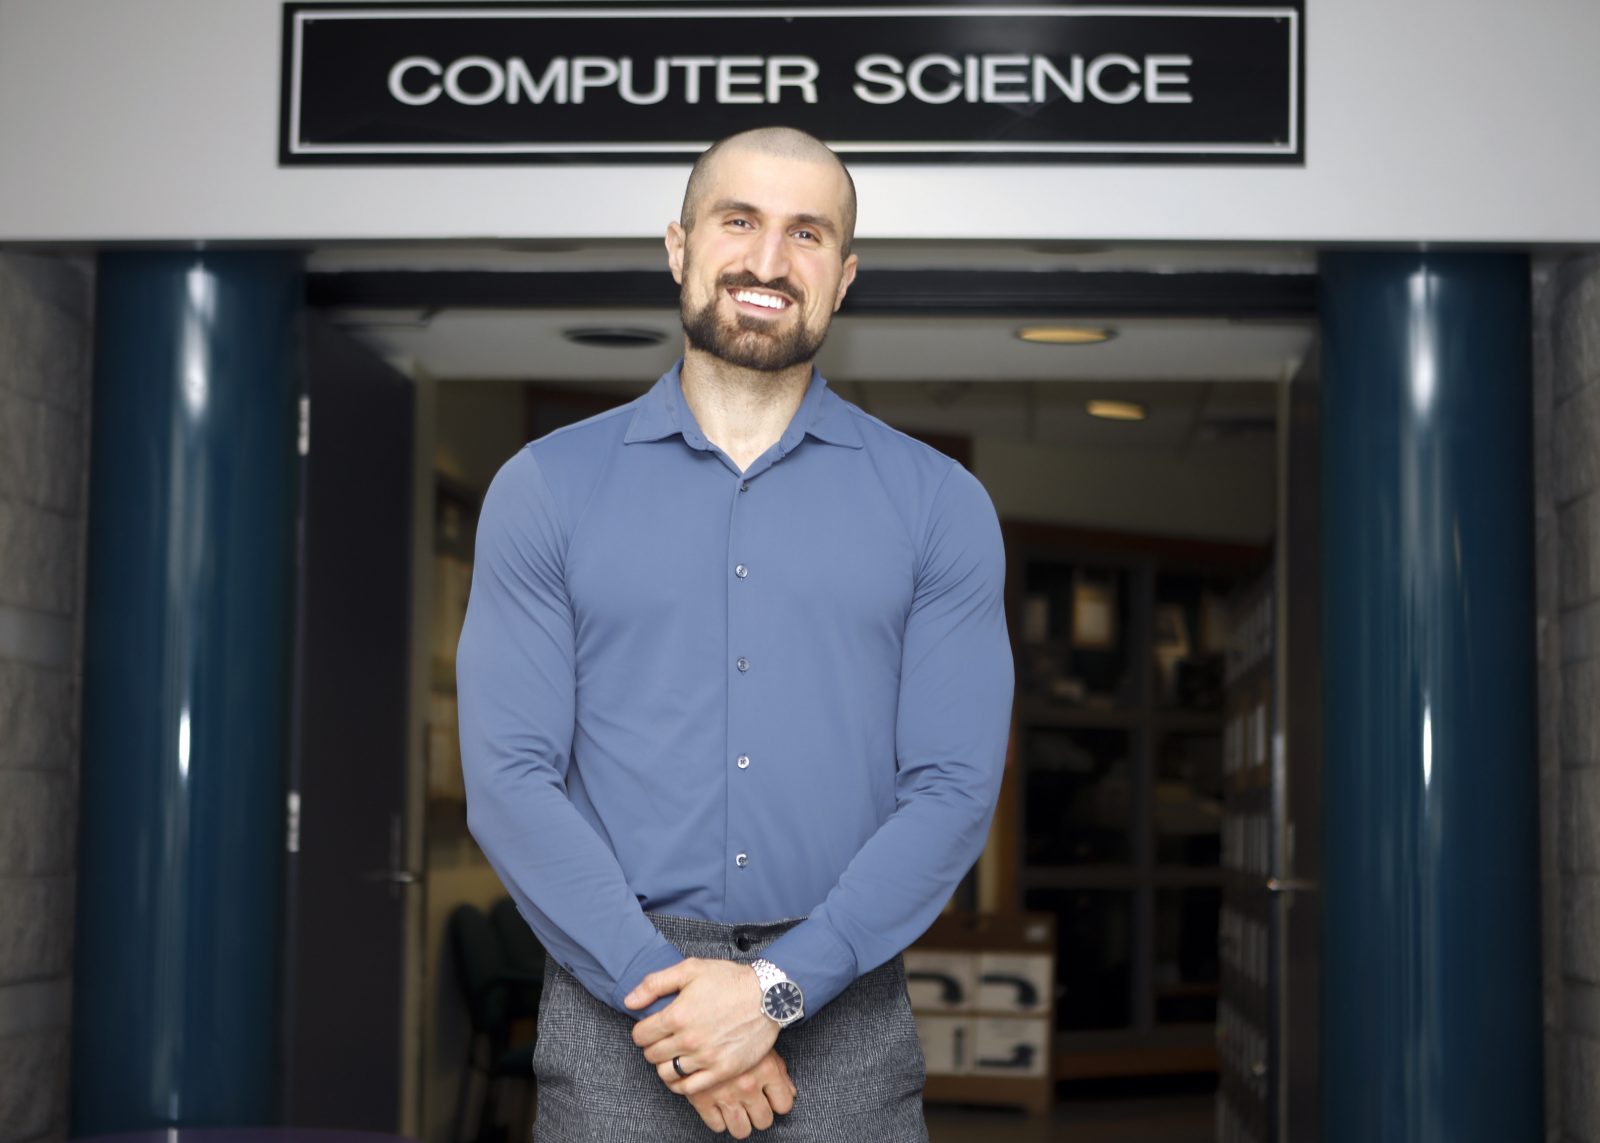 Brock University Computer Science professor Ali Emami stands in a hallway in front of a sign that reads “Computer Science.”